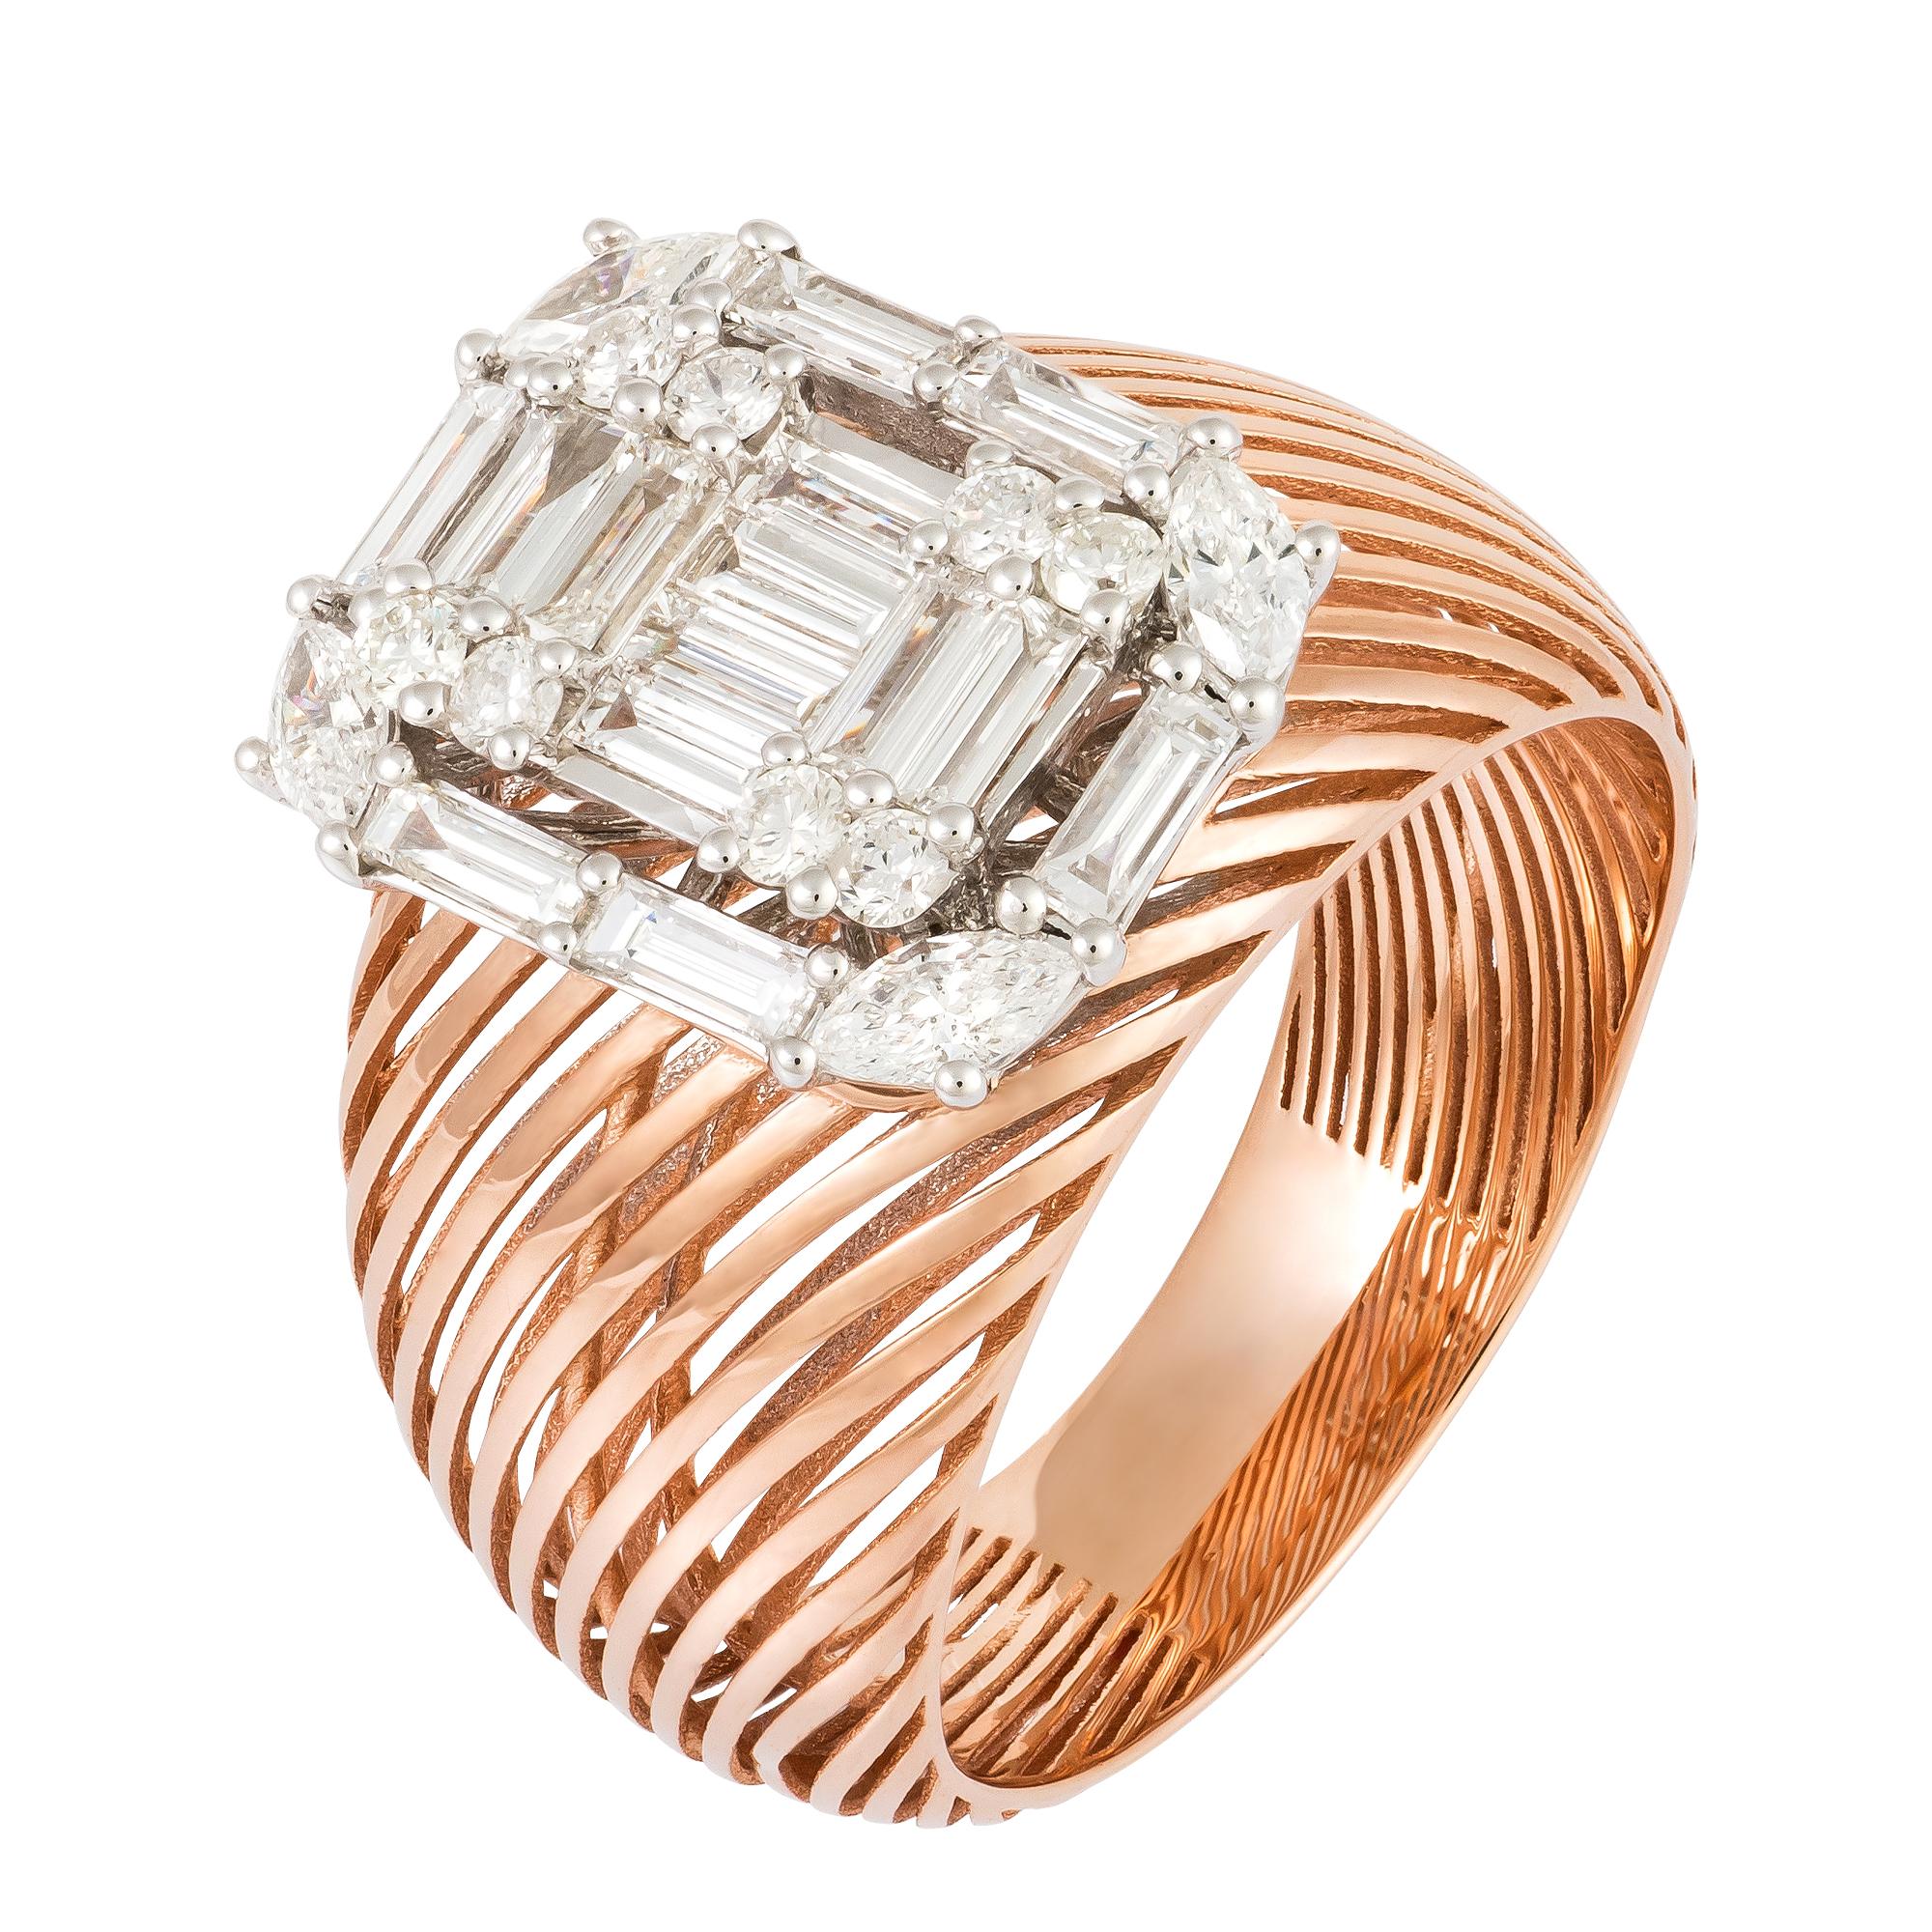 For Sale:  Evening White Pink 18K Gold White Diamond Ring For Her 2